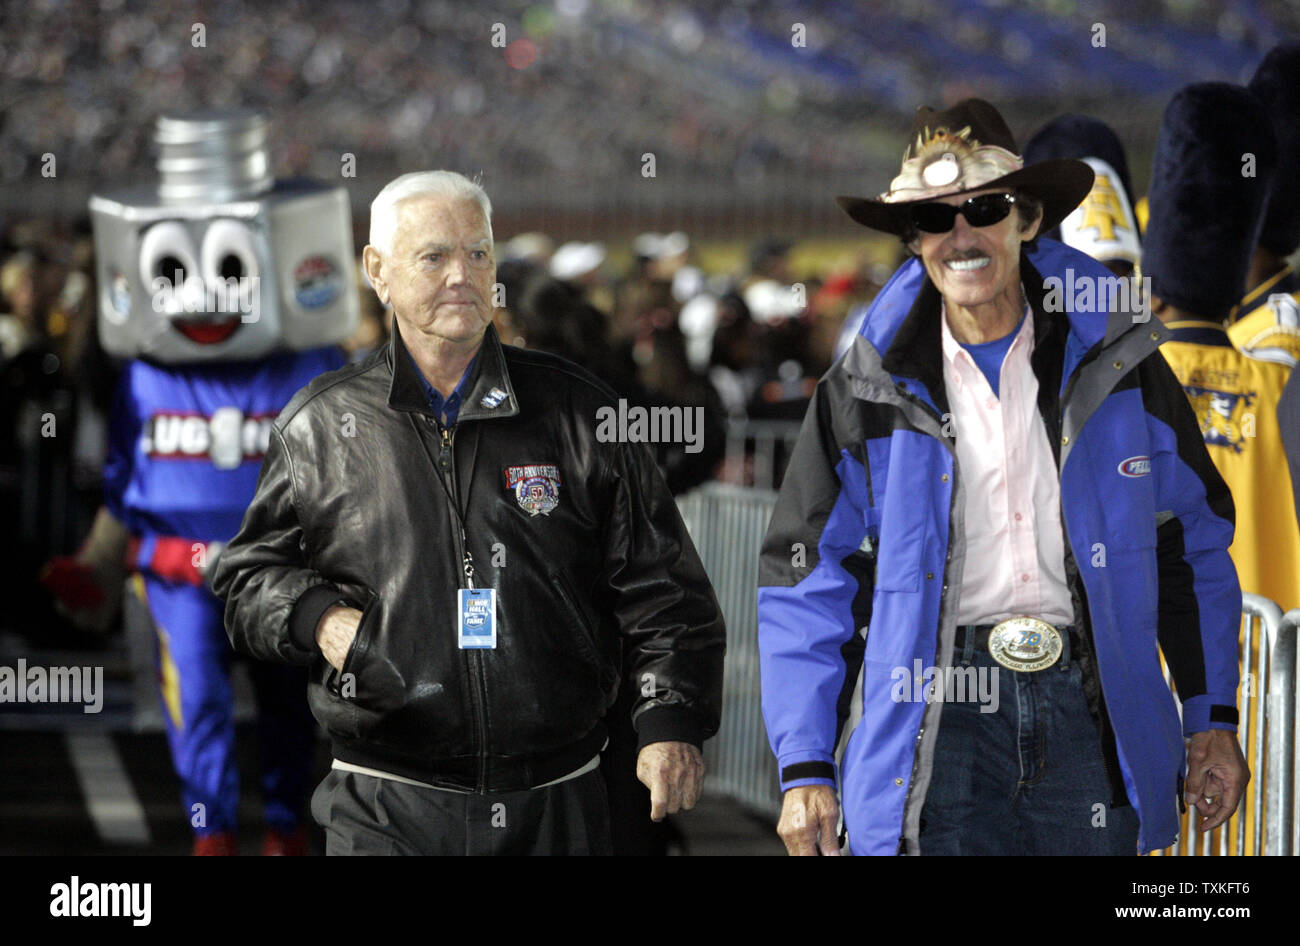 Racing legends Junior Johnson, left, and Richard Petty serve as grand marshals at the NASCAR Banking 500 Race at Lowe's Motor Speedway in Concord, North Carolina on October 17, 2009.        UPI/Nell Redmond . Stock Photo